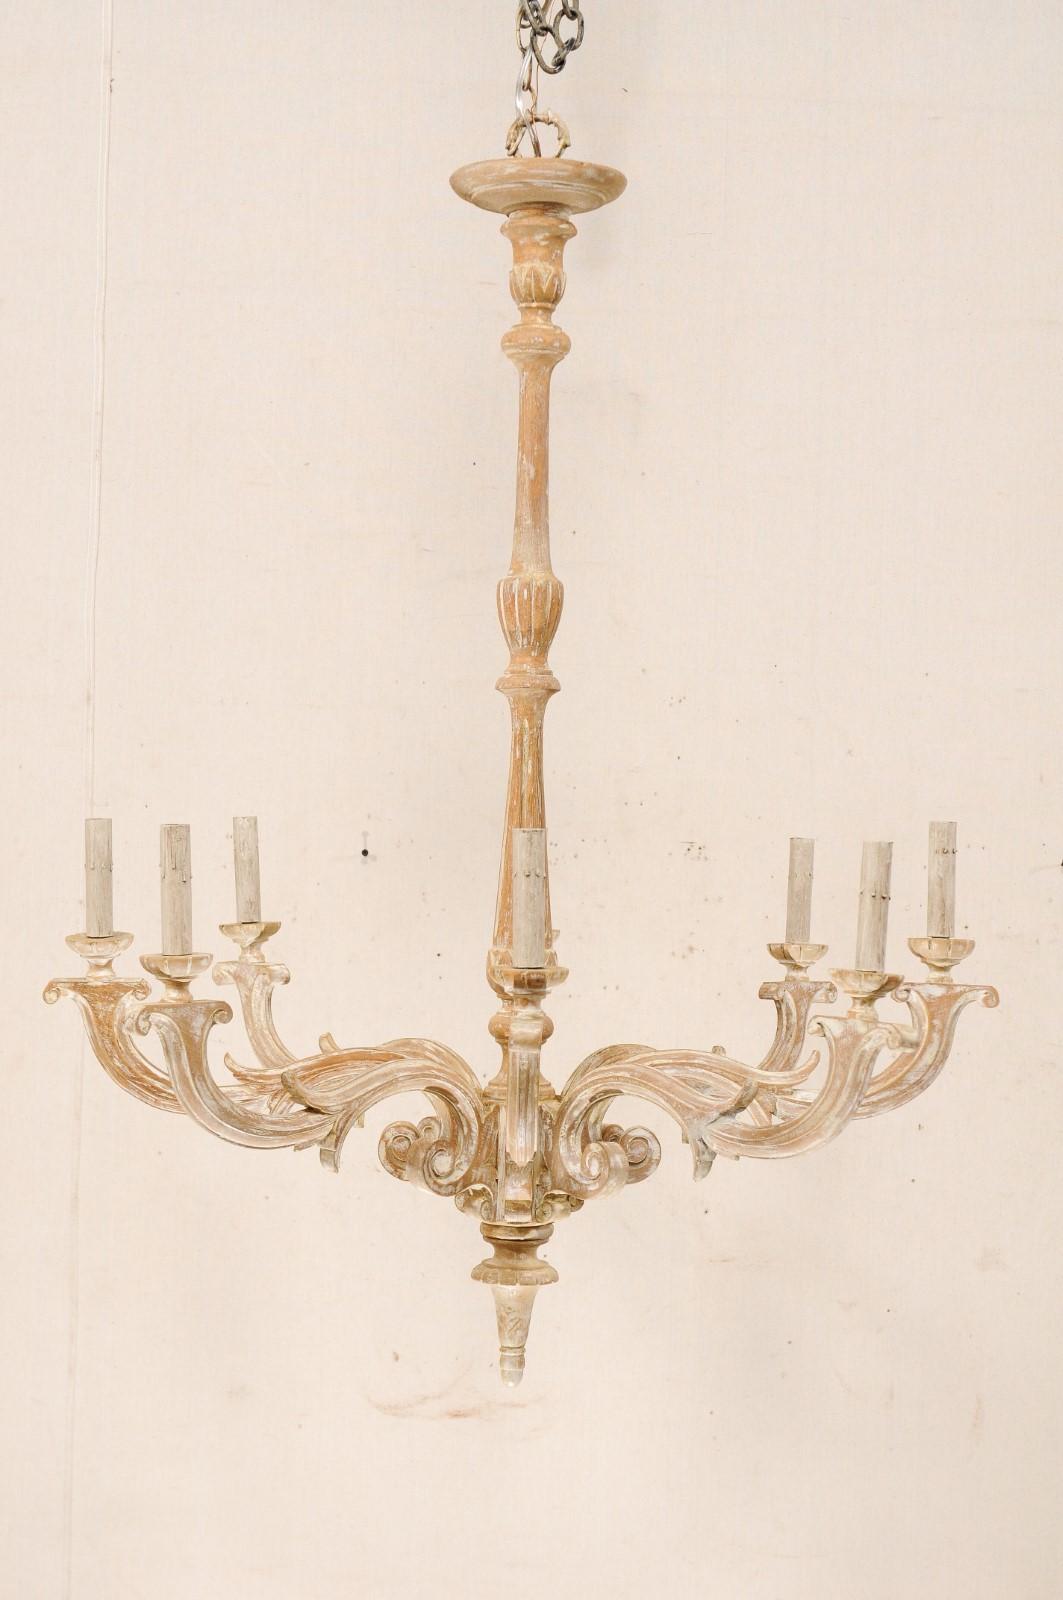 A French eight-light carved wood chandelier with elongated central column. This French mid-20th century chandelier features a long central wood column, with carved with fluting and wrapped foliage motif, terminating into a carved bottom final. The